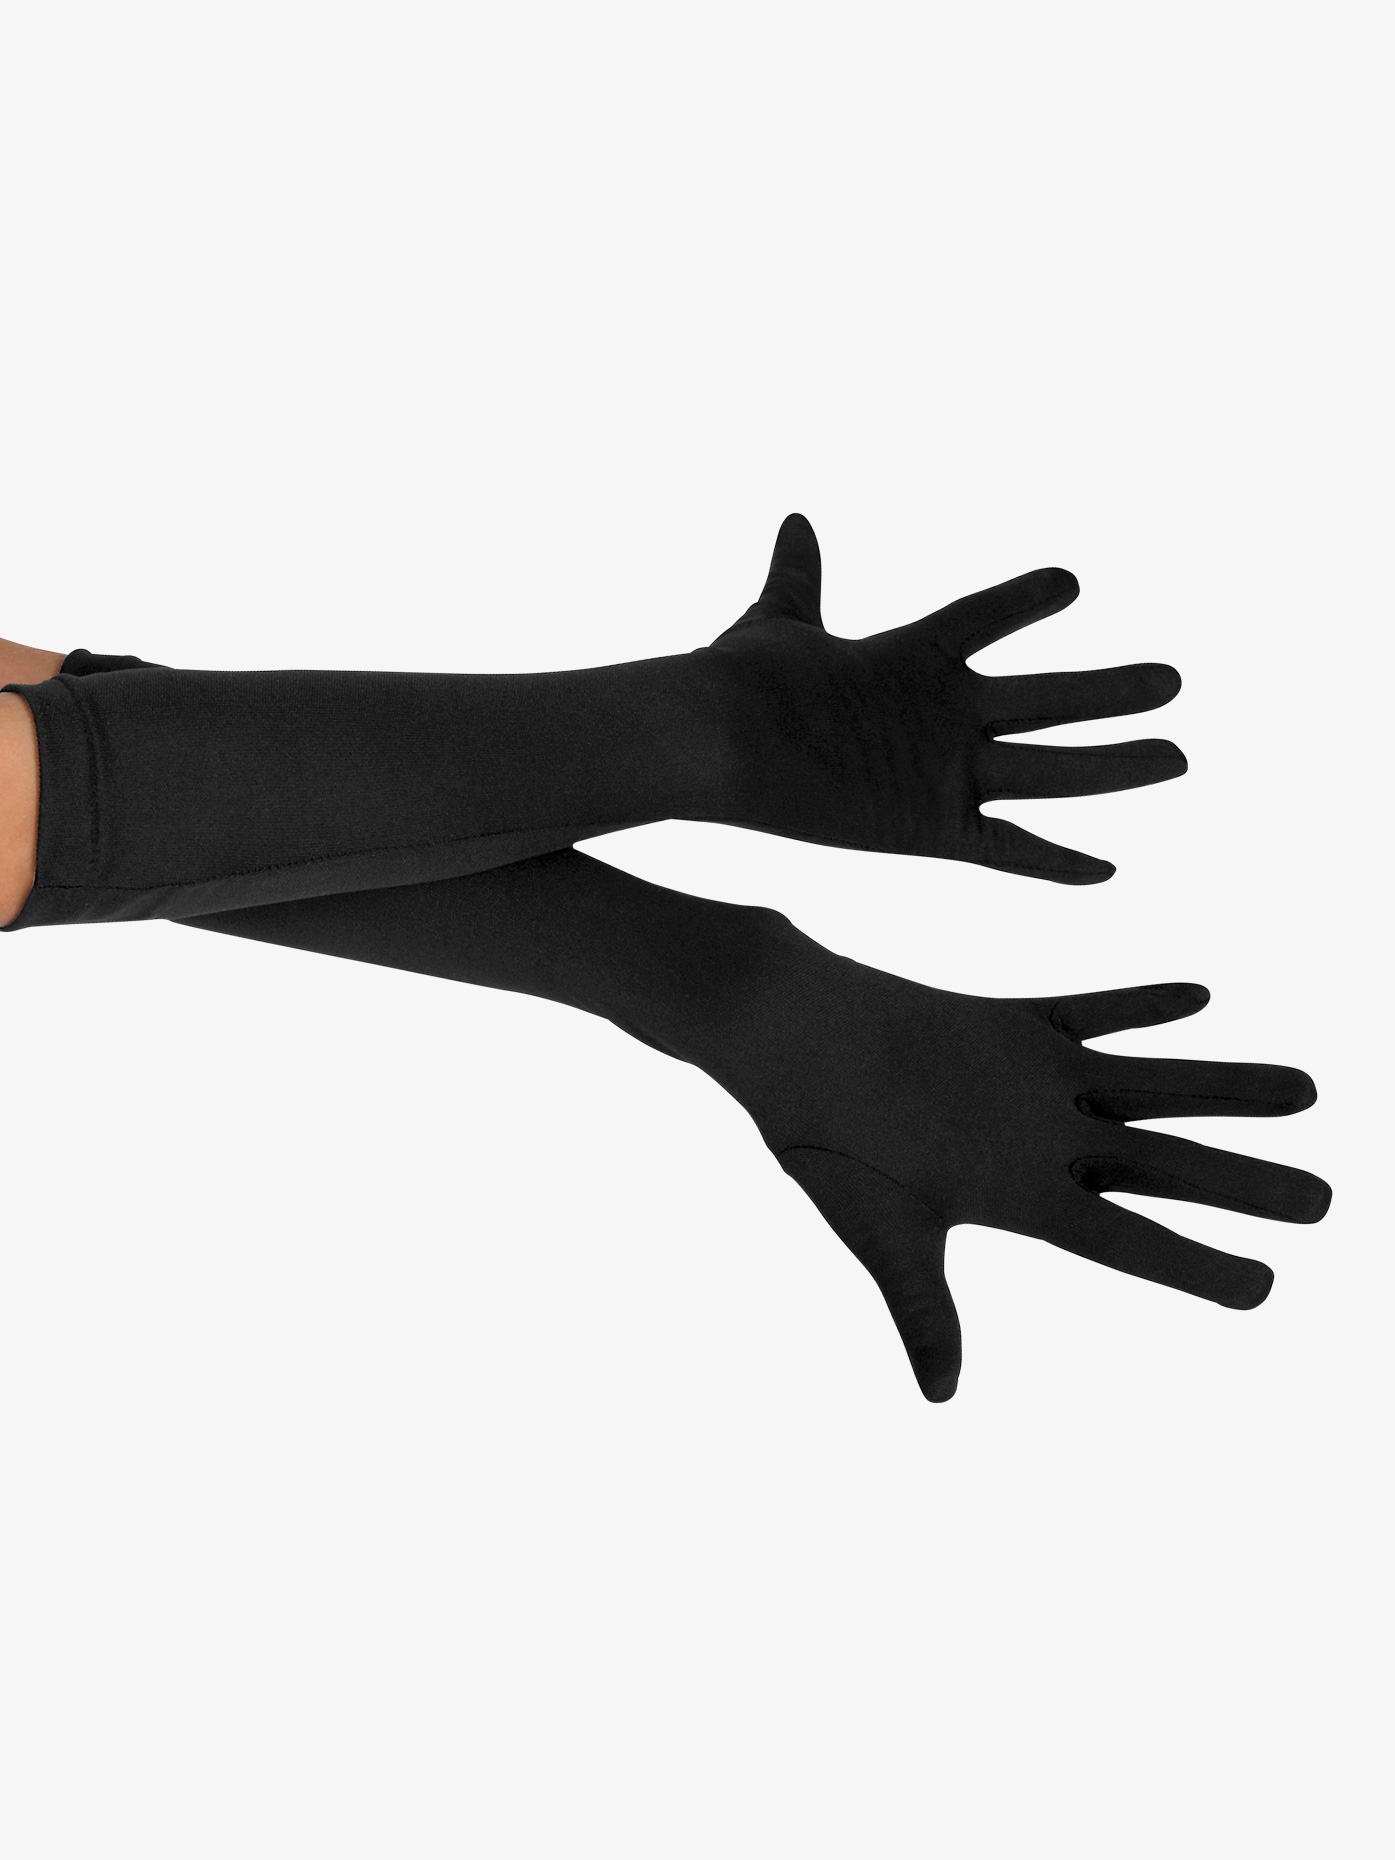 Long Fingered Gloves Adult/Child Costume Accessory